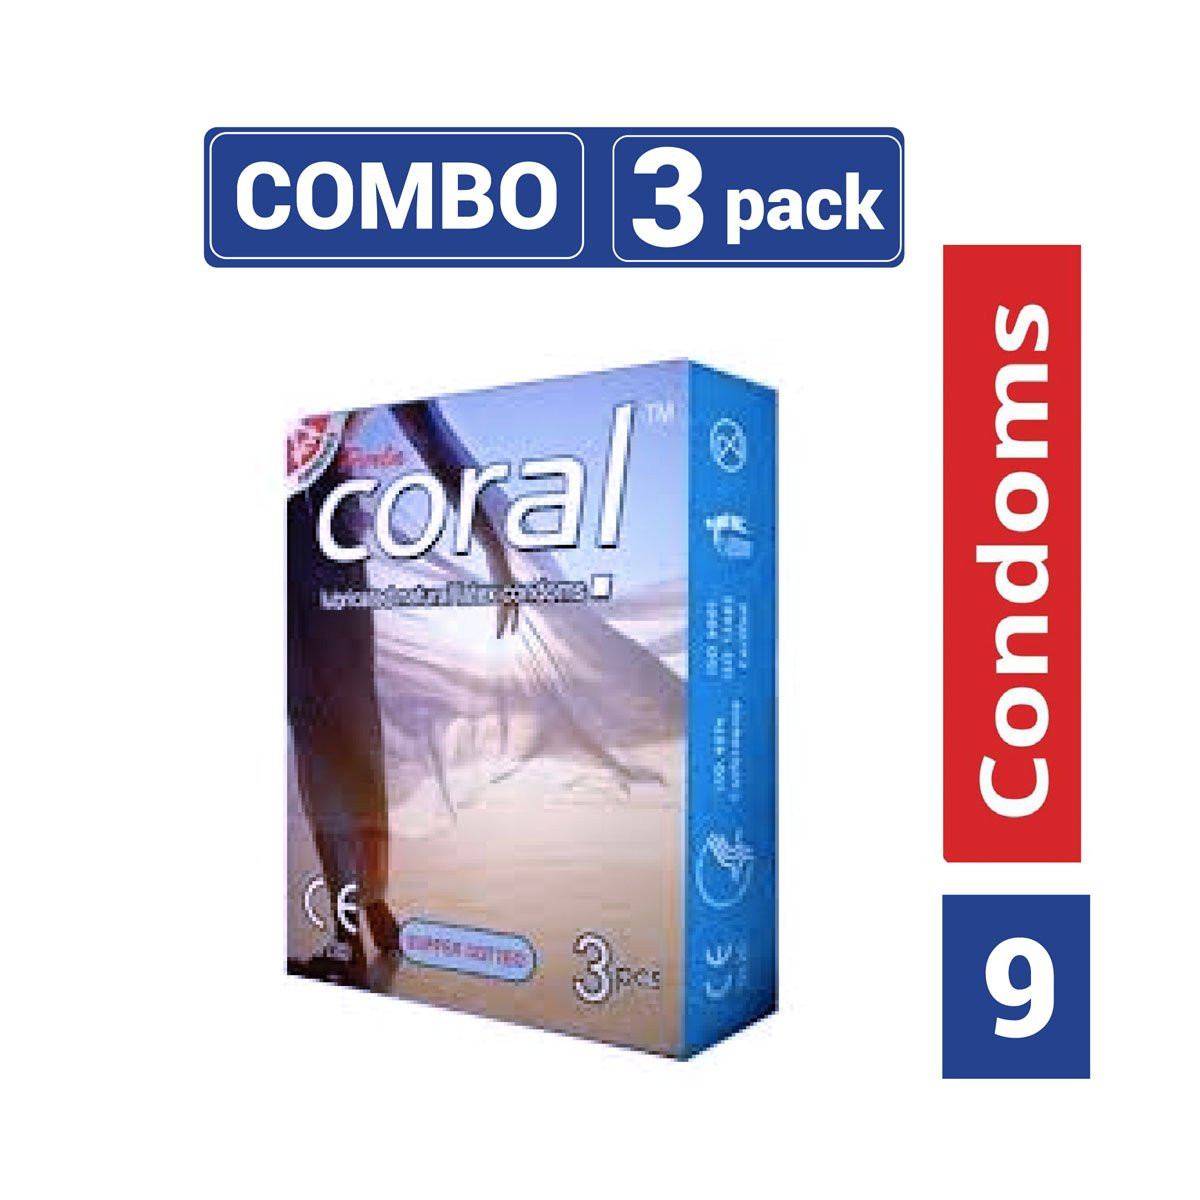 Coral Super Dotted Lubricated Natural Latex Condoms- Combo 3 Packs 3x3=9pcs